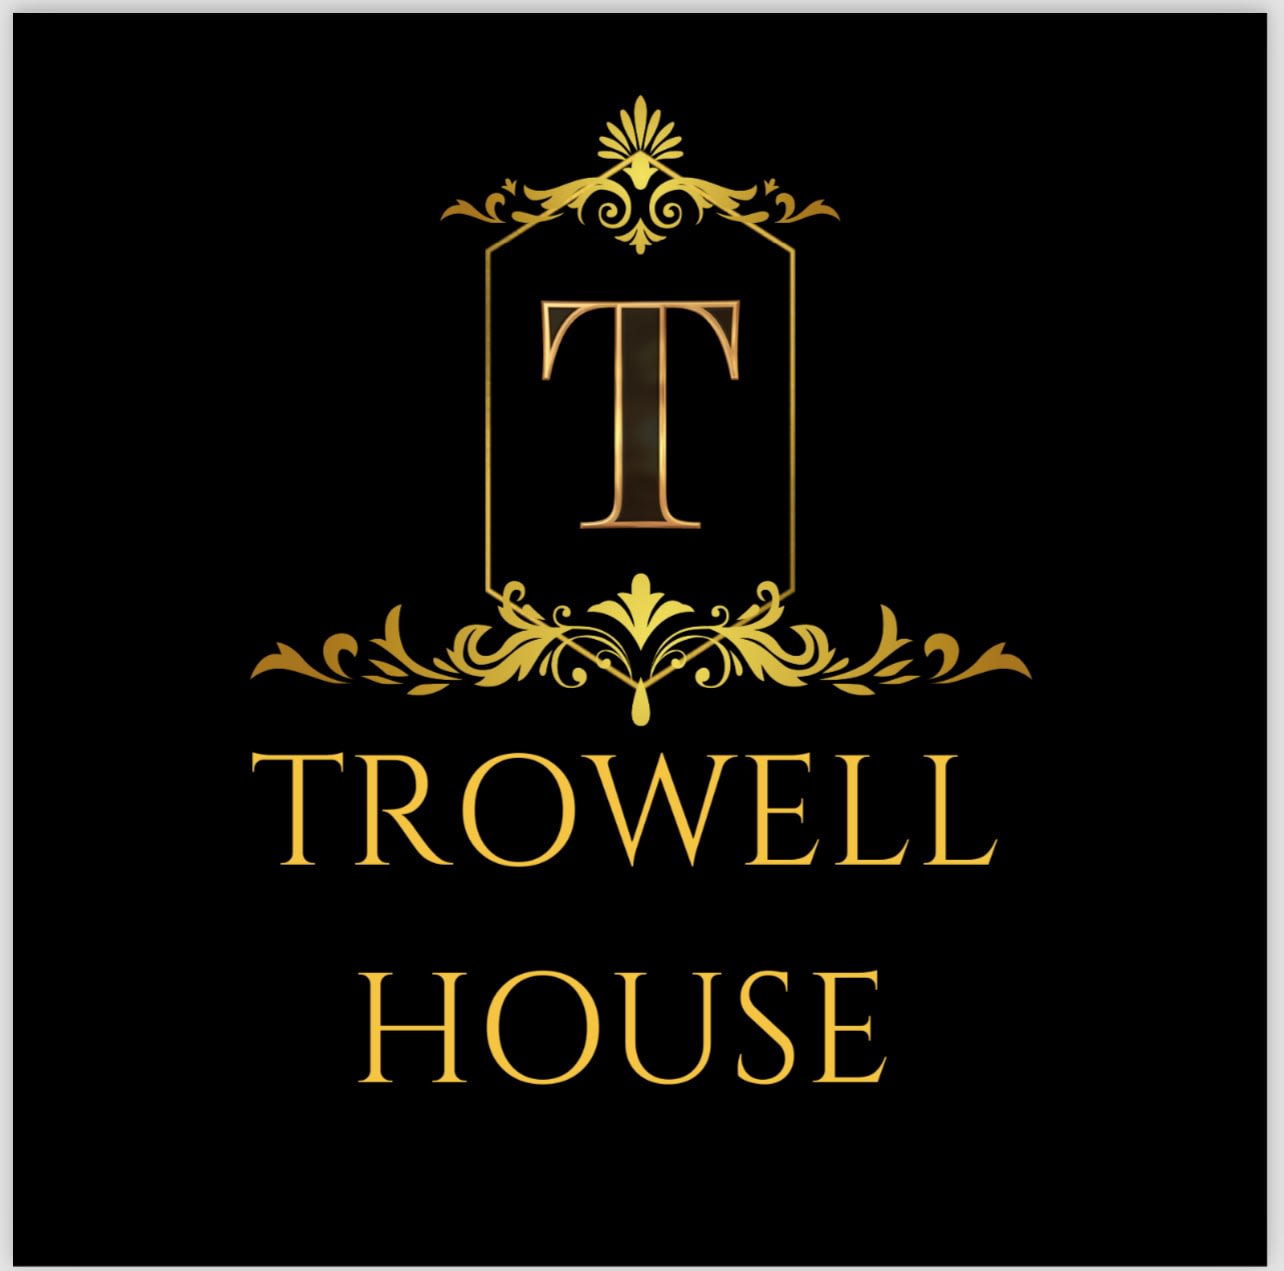 Trowell House